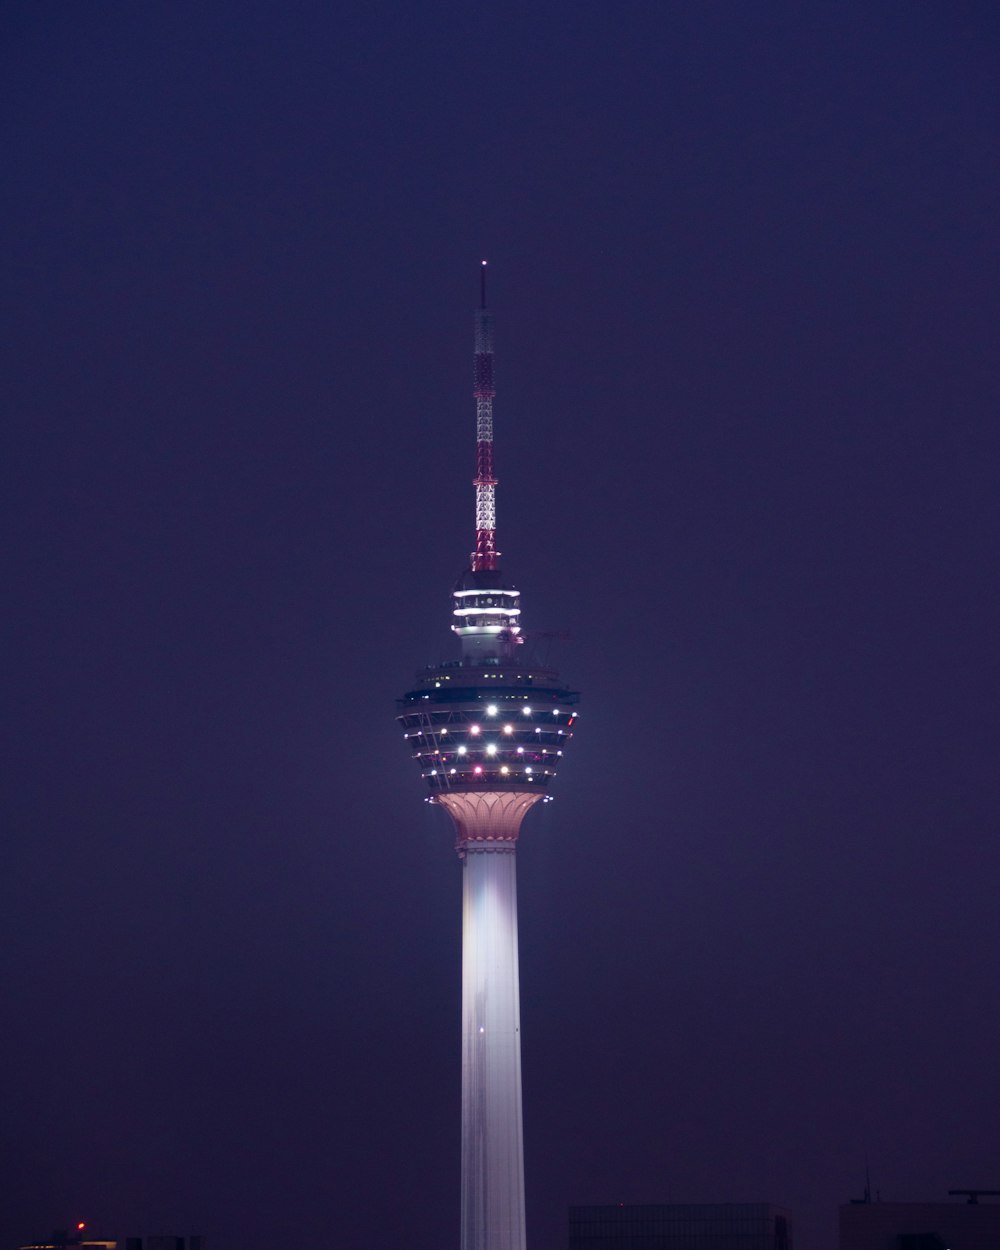 a tall pointy tower with lights at night